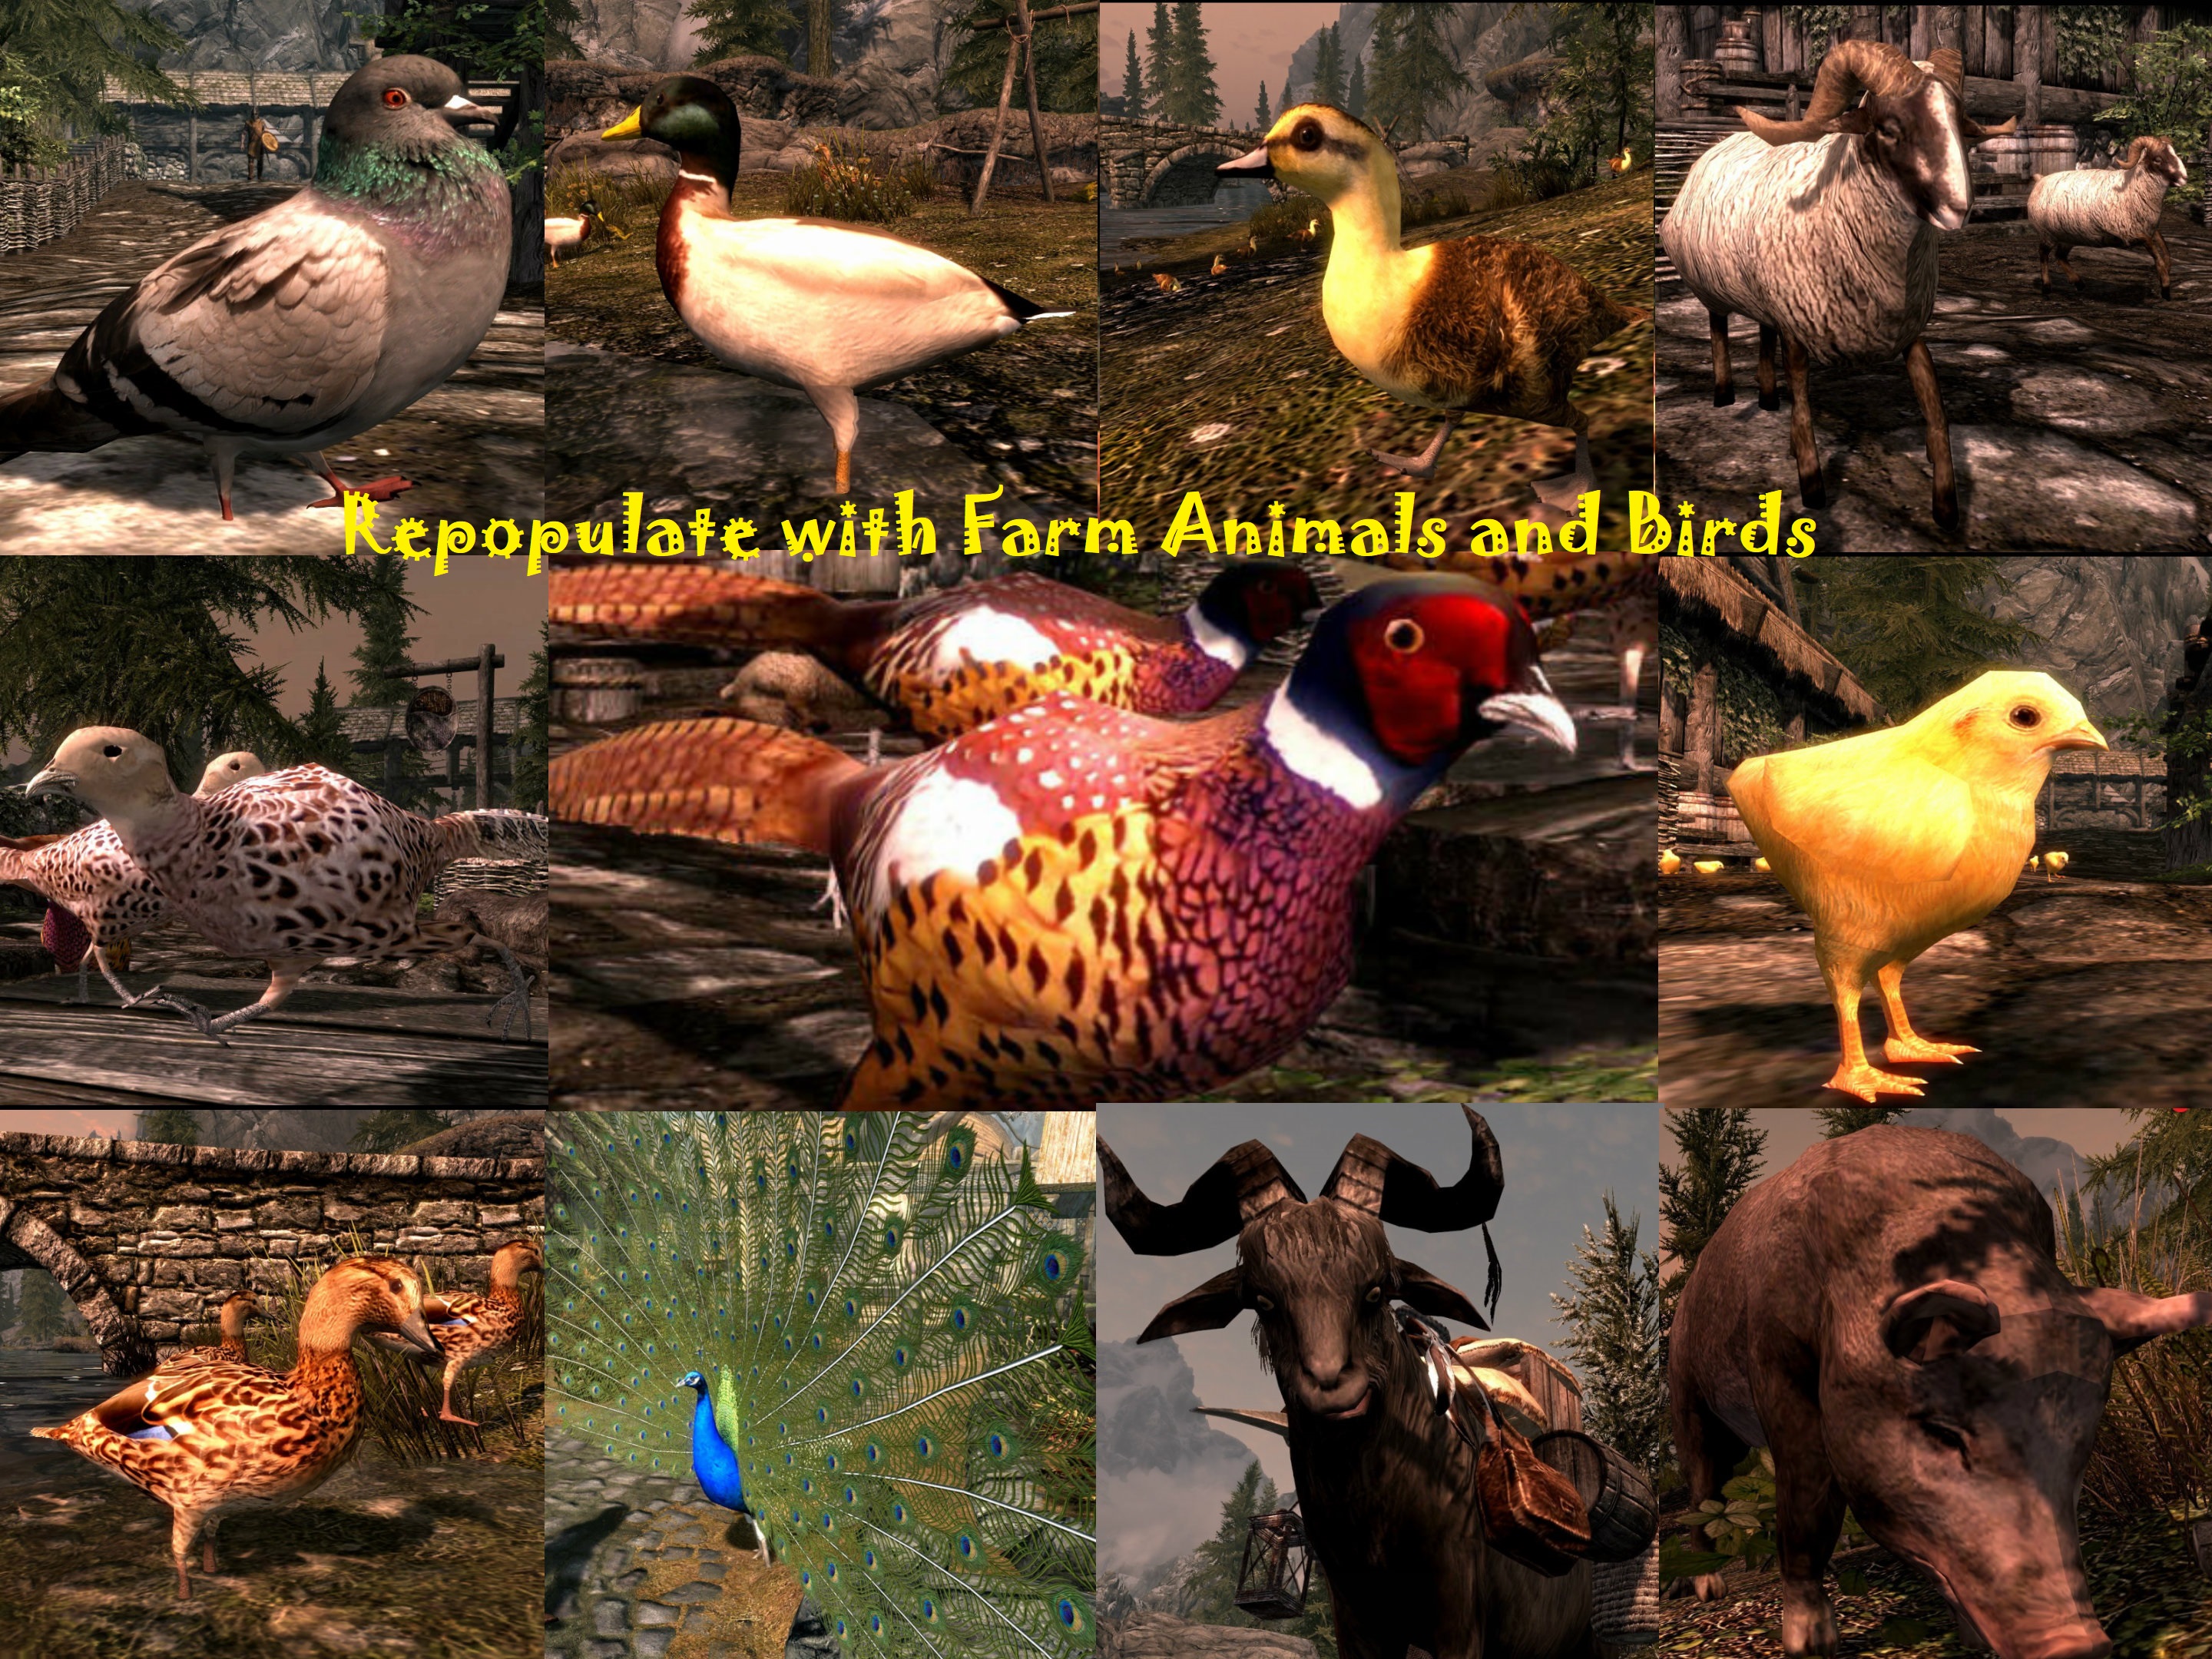 Repopulate with Farm Animals 6